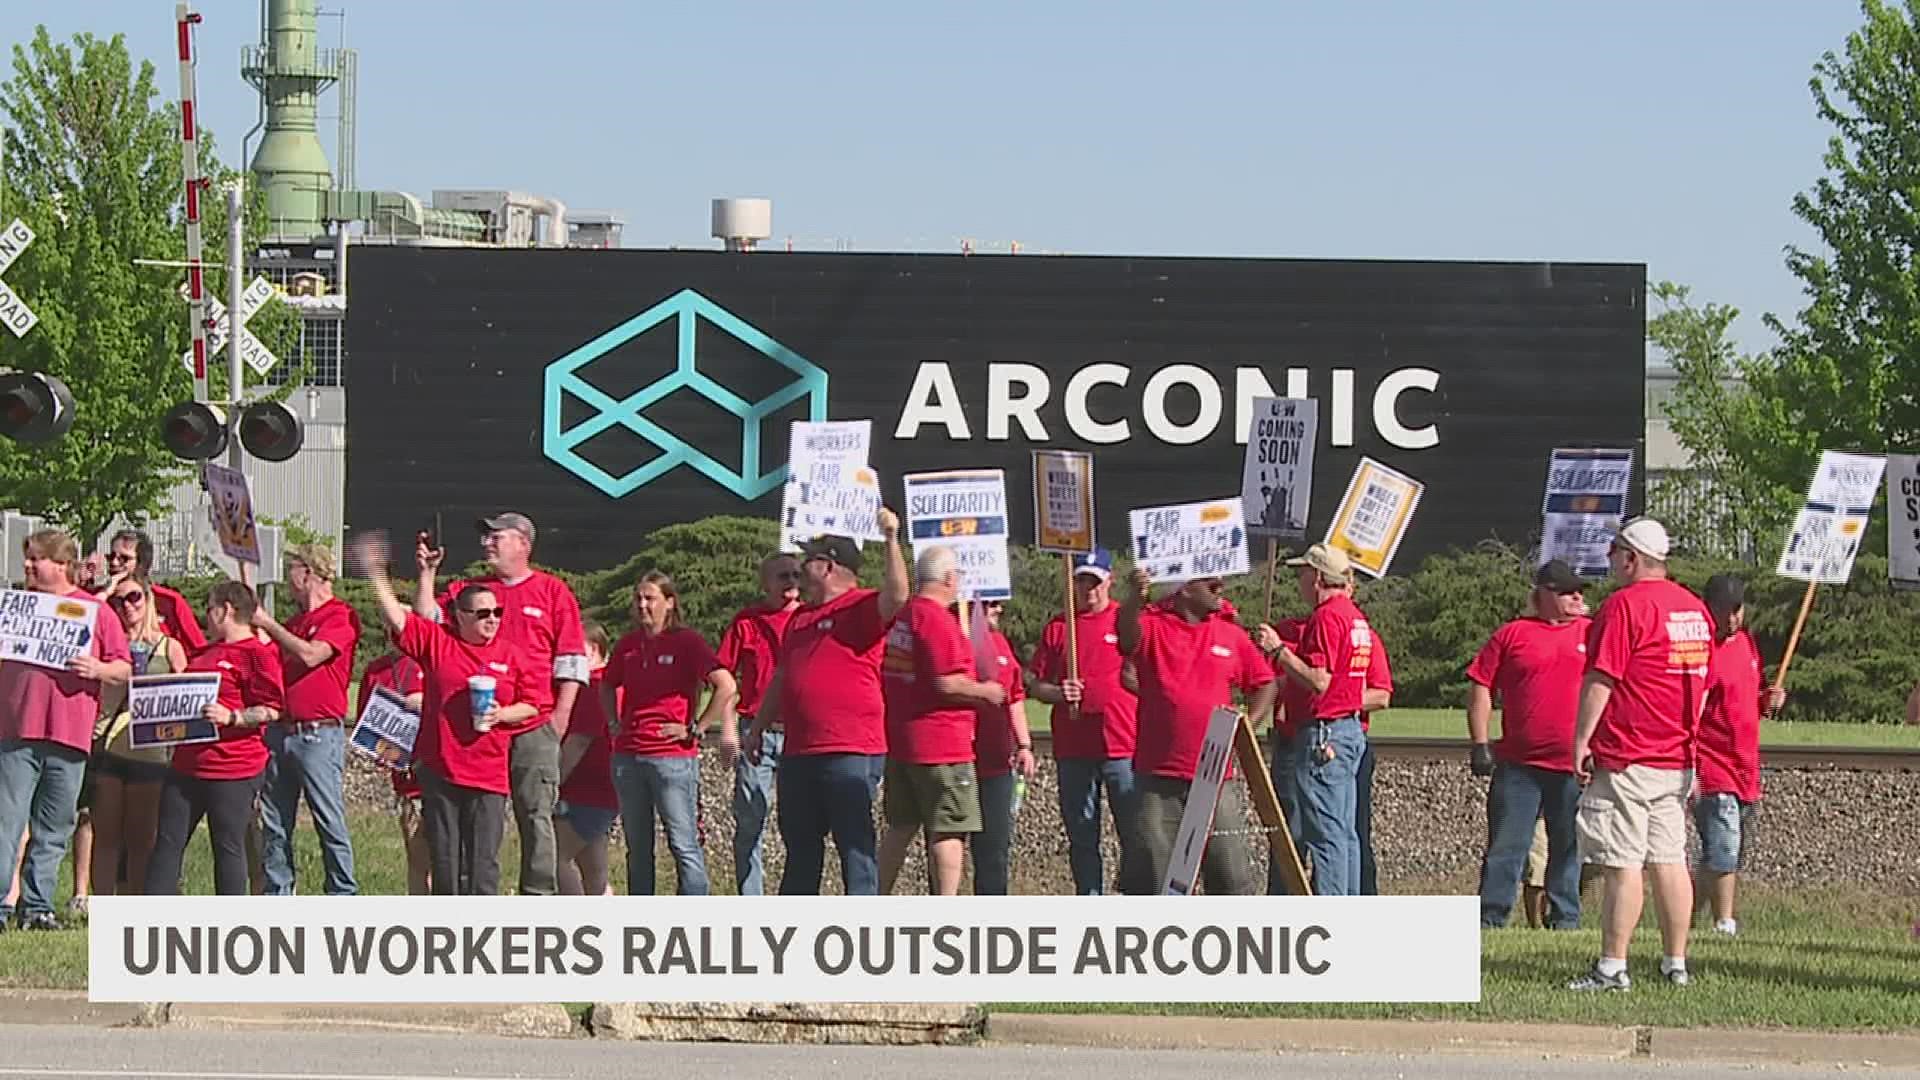 Not long after Local 105 members marched to Arconic with signs and chants, union leaders confirmed a deal had been made. It must now go through a voting process.